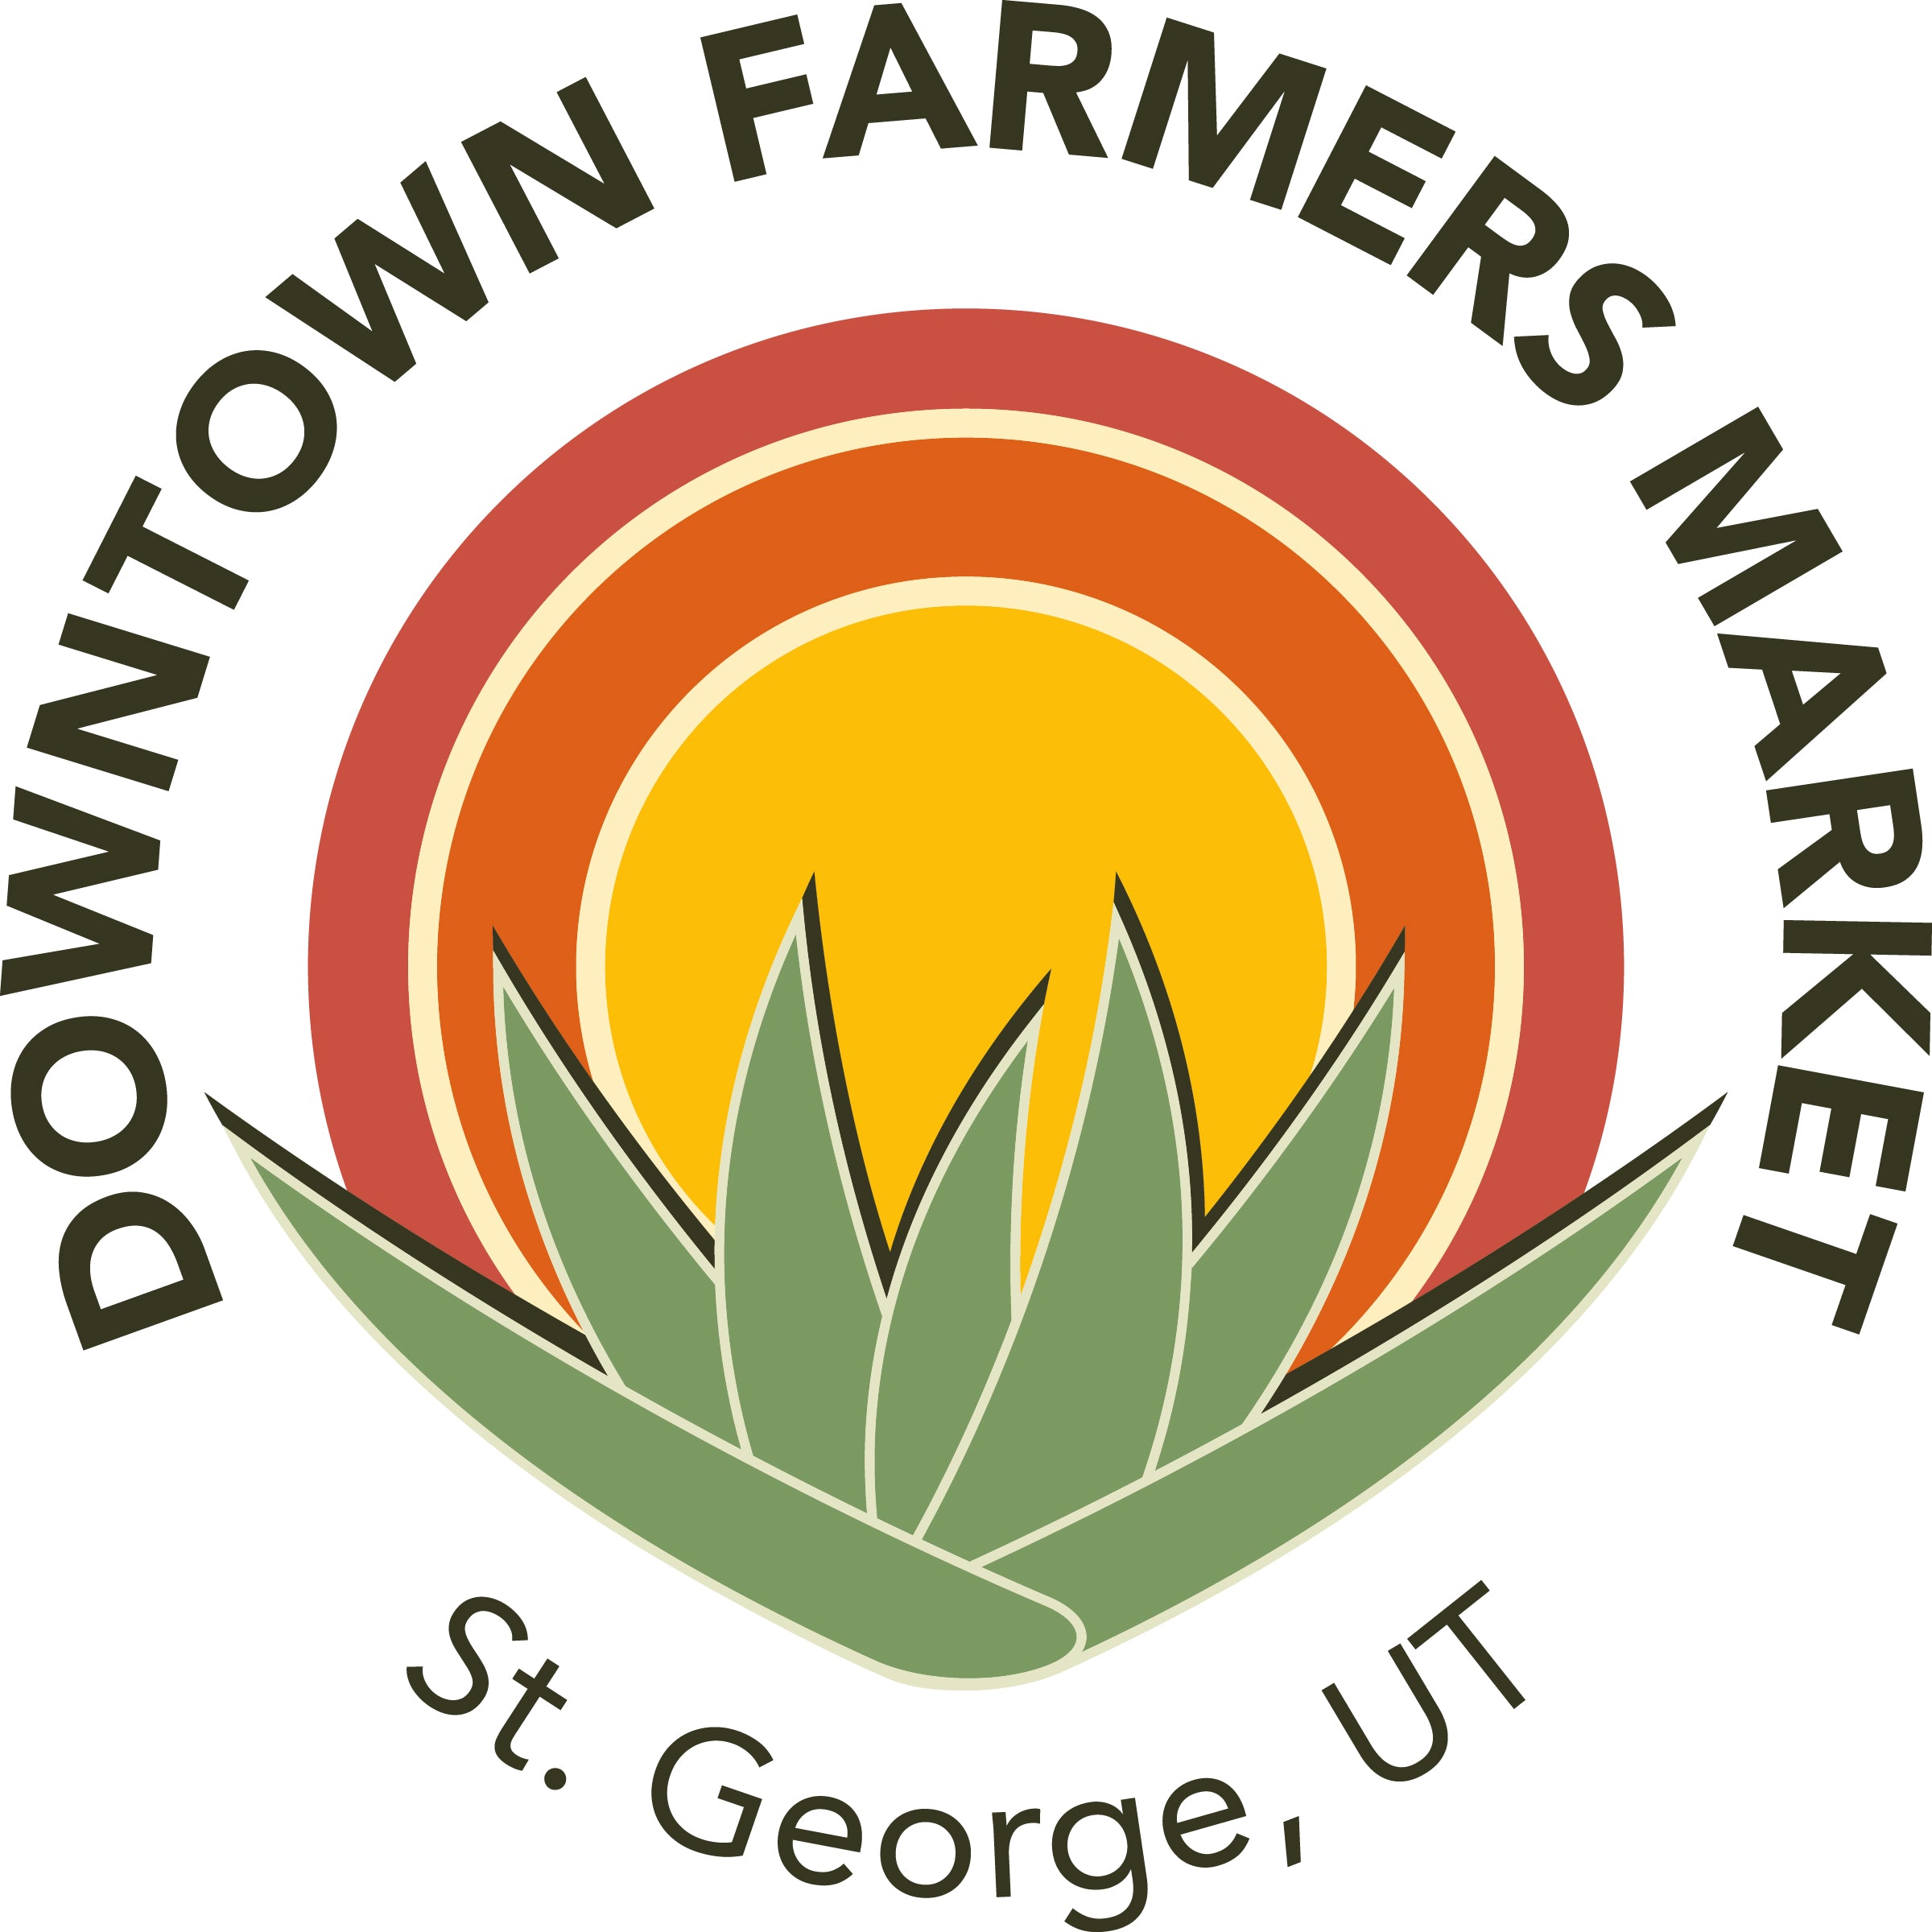 The Downtown Farmers Market